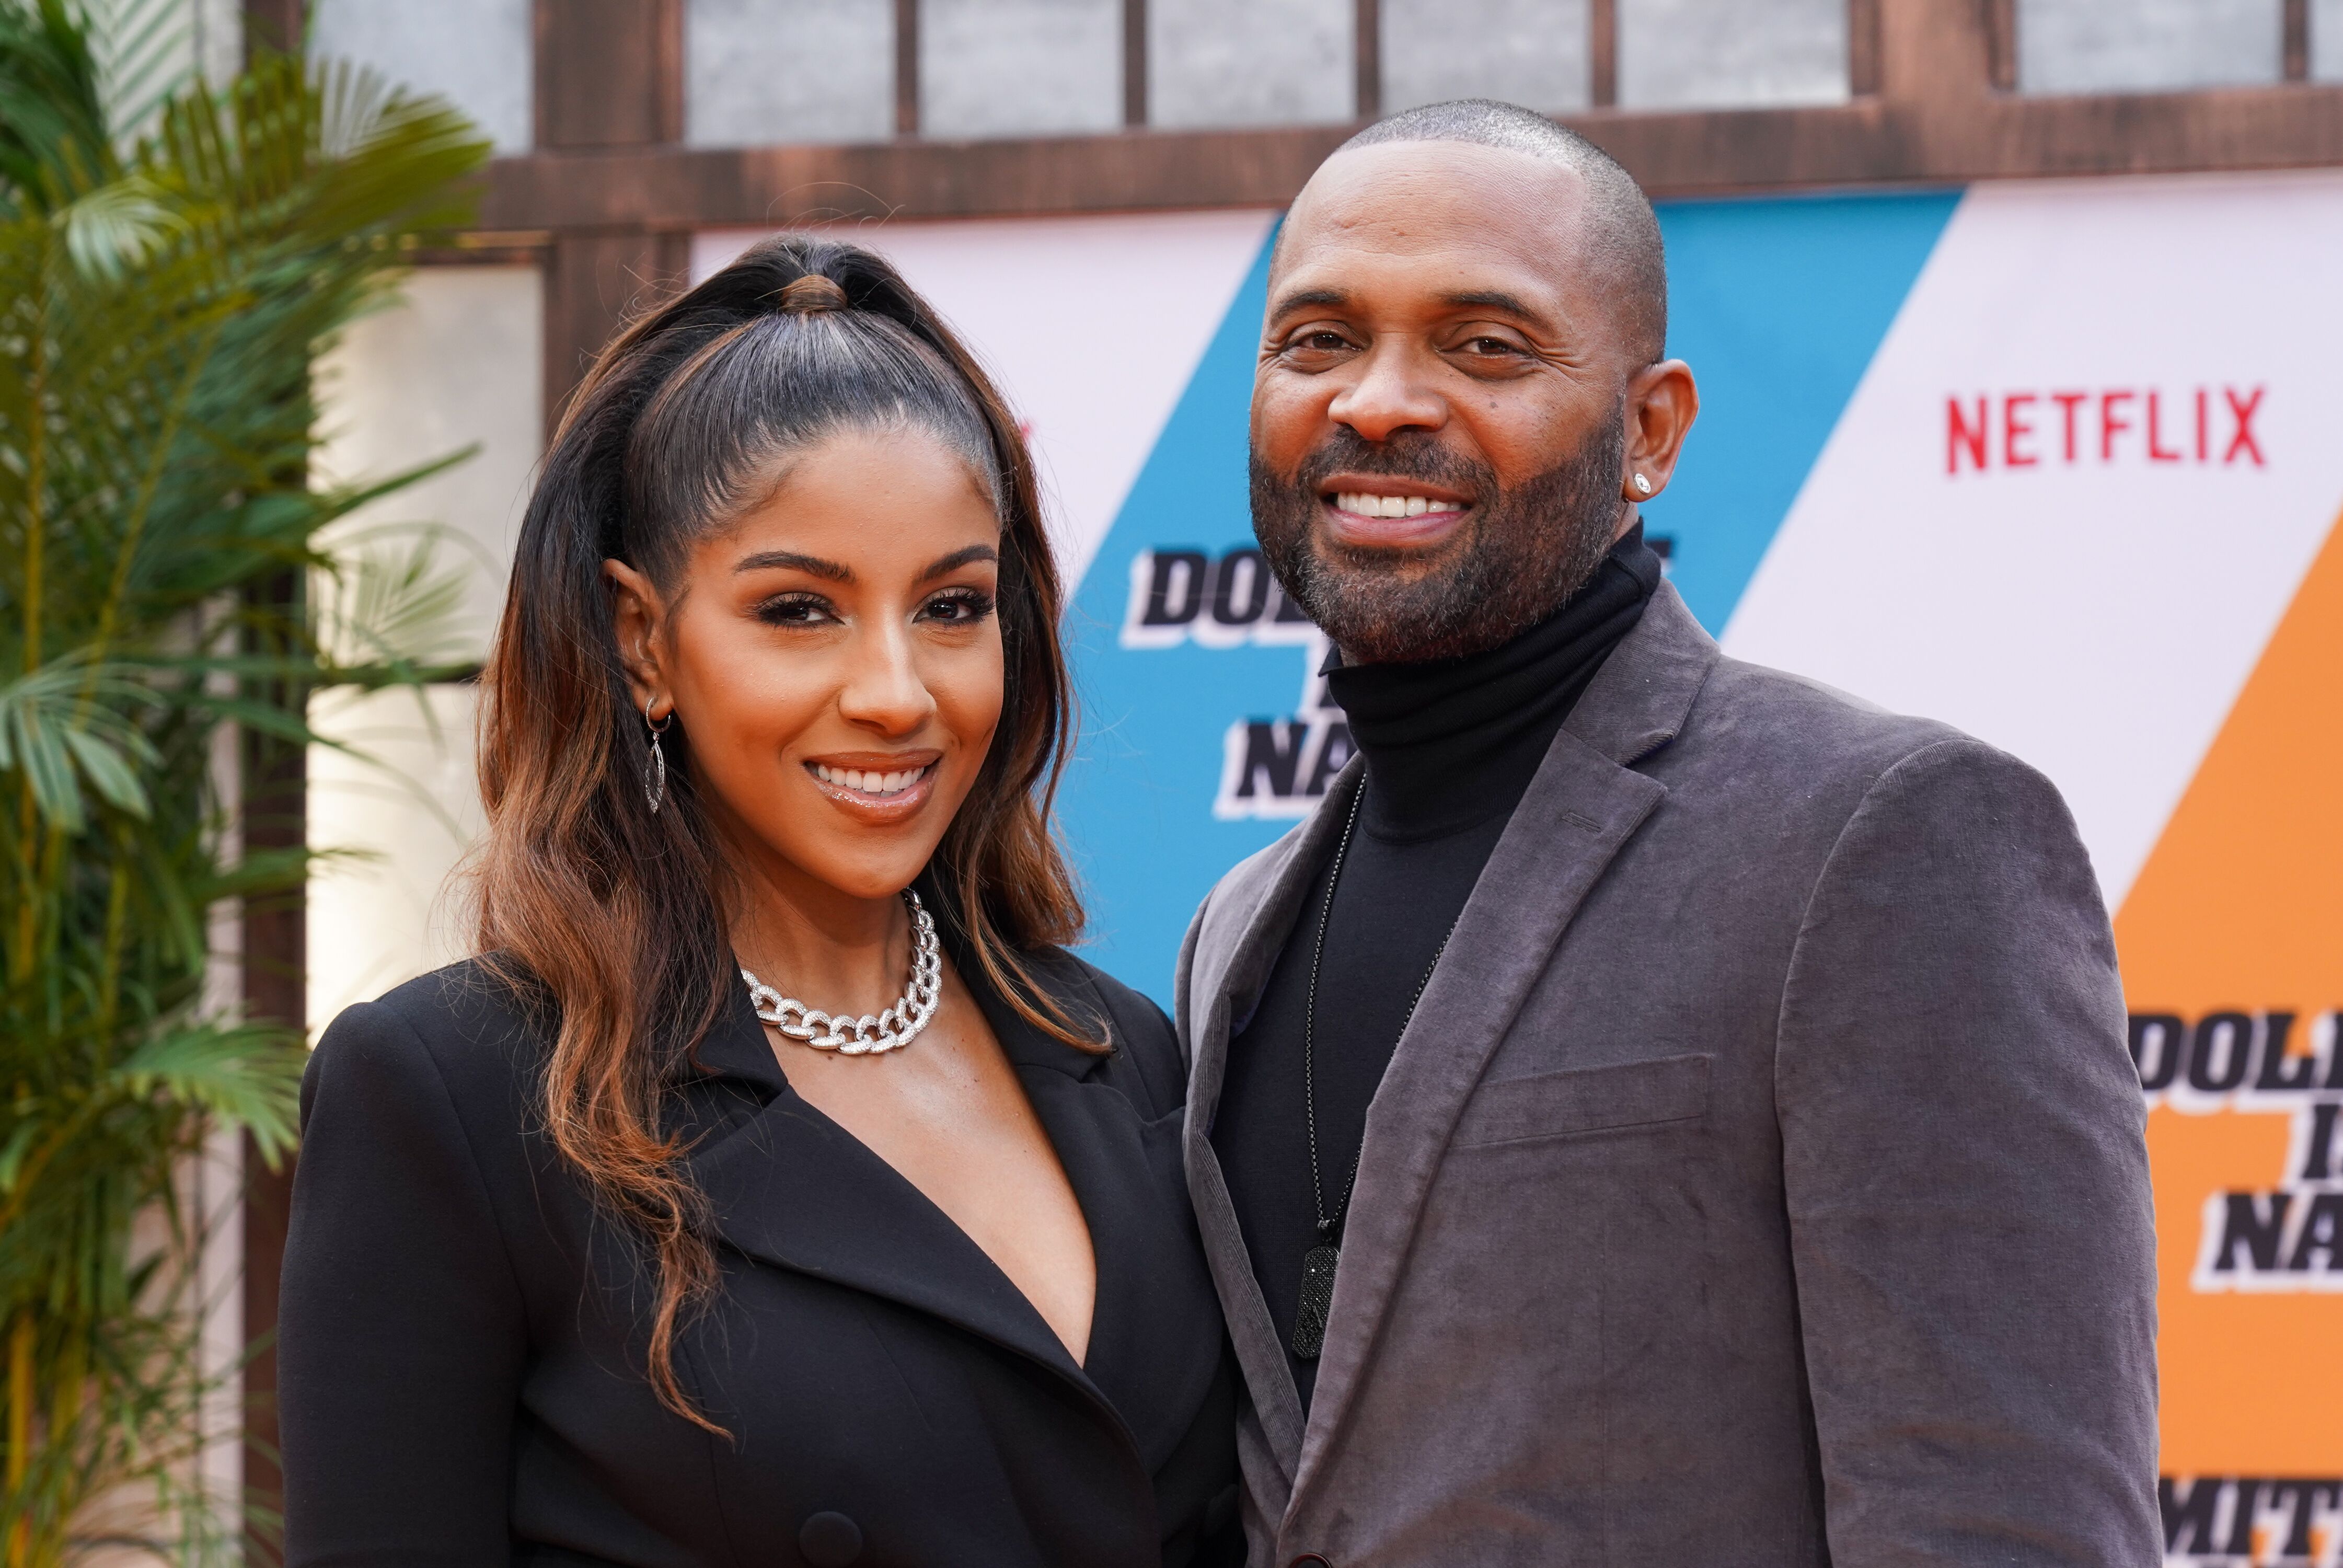 Mike Epps and Kyra Robinson attend the LA premiere of Netflix's "Dolemite Is My Name" on September 28, 2019. | Photo: Getty Images